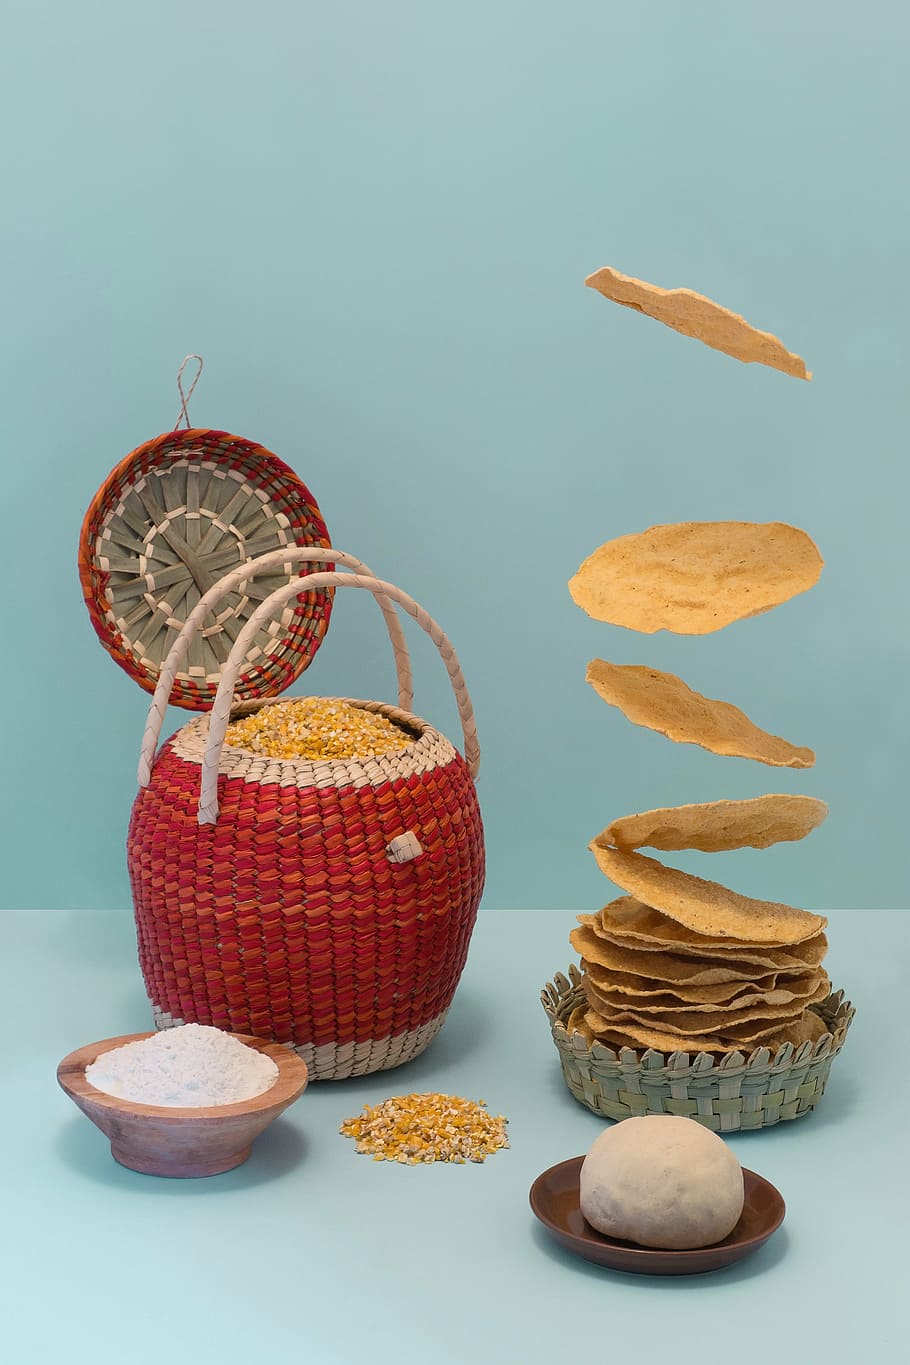 wicker round, red, gray, basket, teal surface, brown, bowl, chips, wicker, top